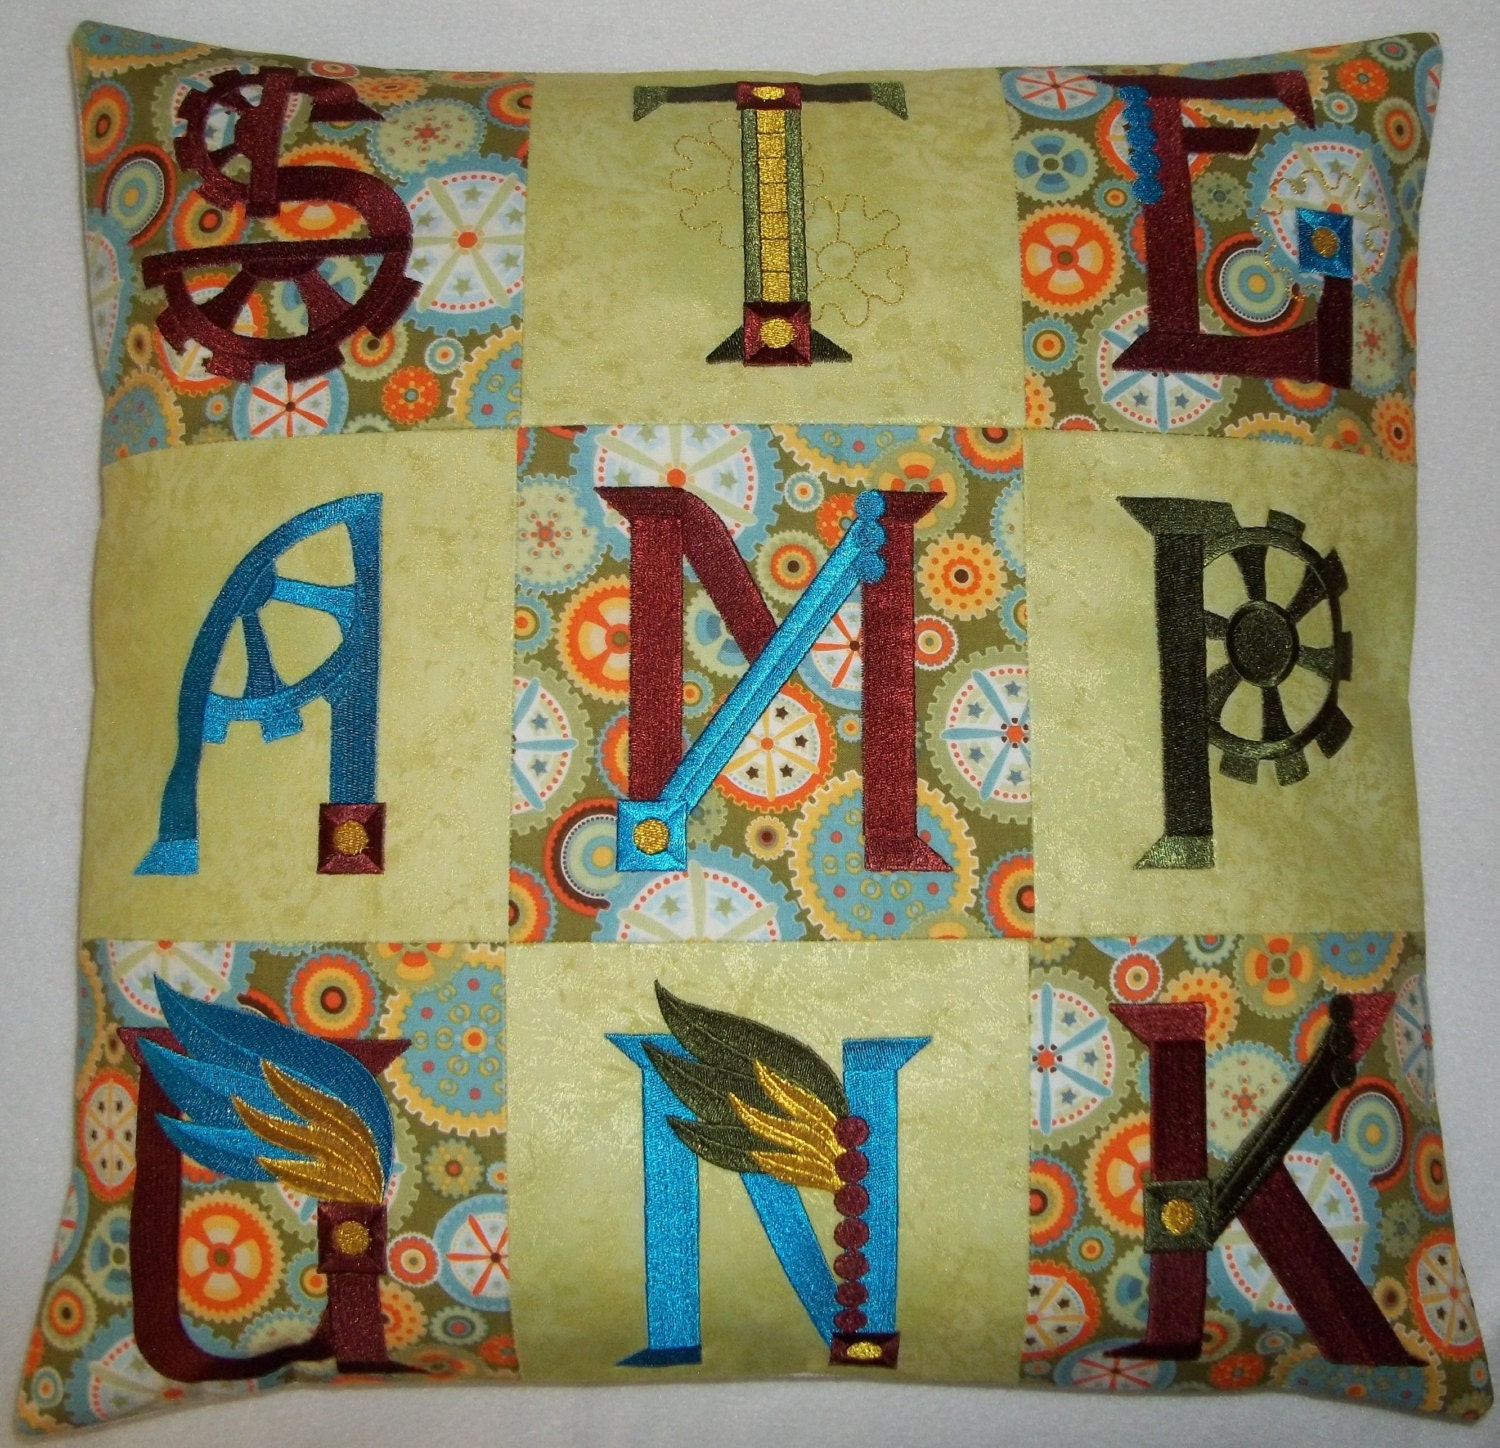 Machine embroidered Steampunk cushion cover\ throw pillow cover, Steampunk alphabet, with clockwork fabric , measures approx. 17in x 17in.